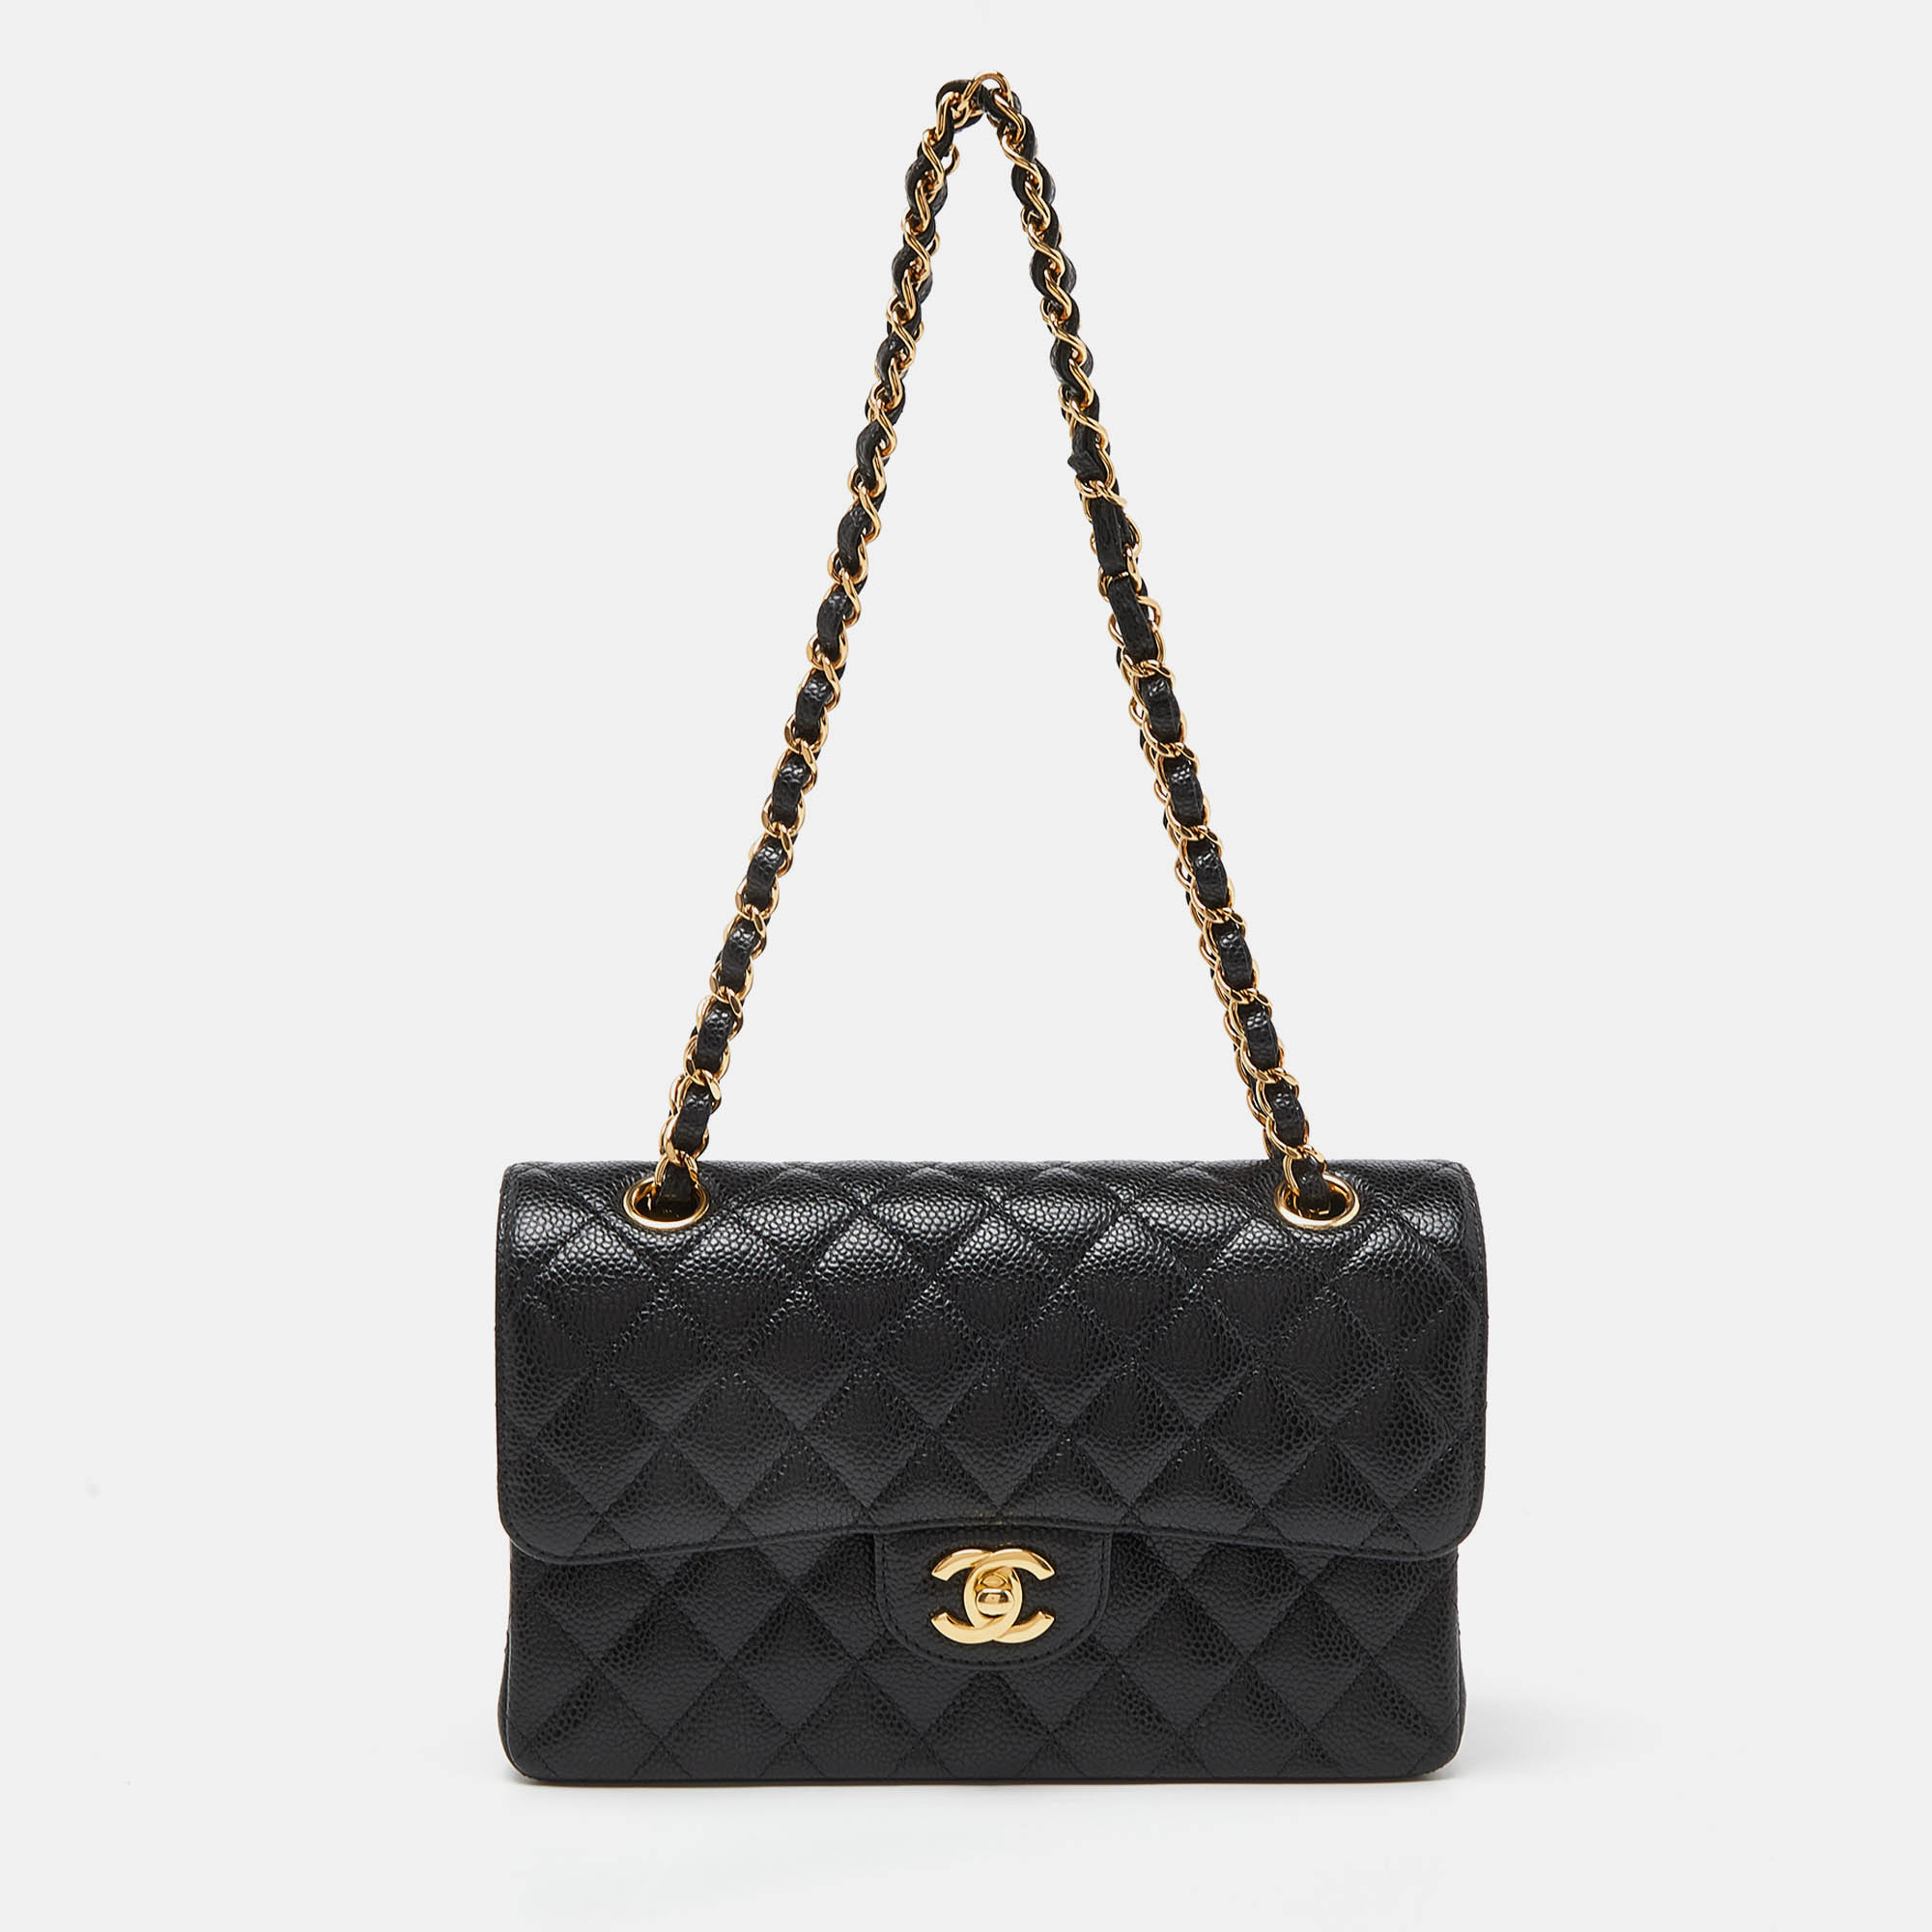 Chanel black quilted caviar leather small classic double flap bag